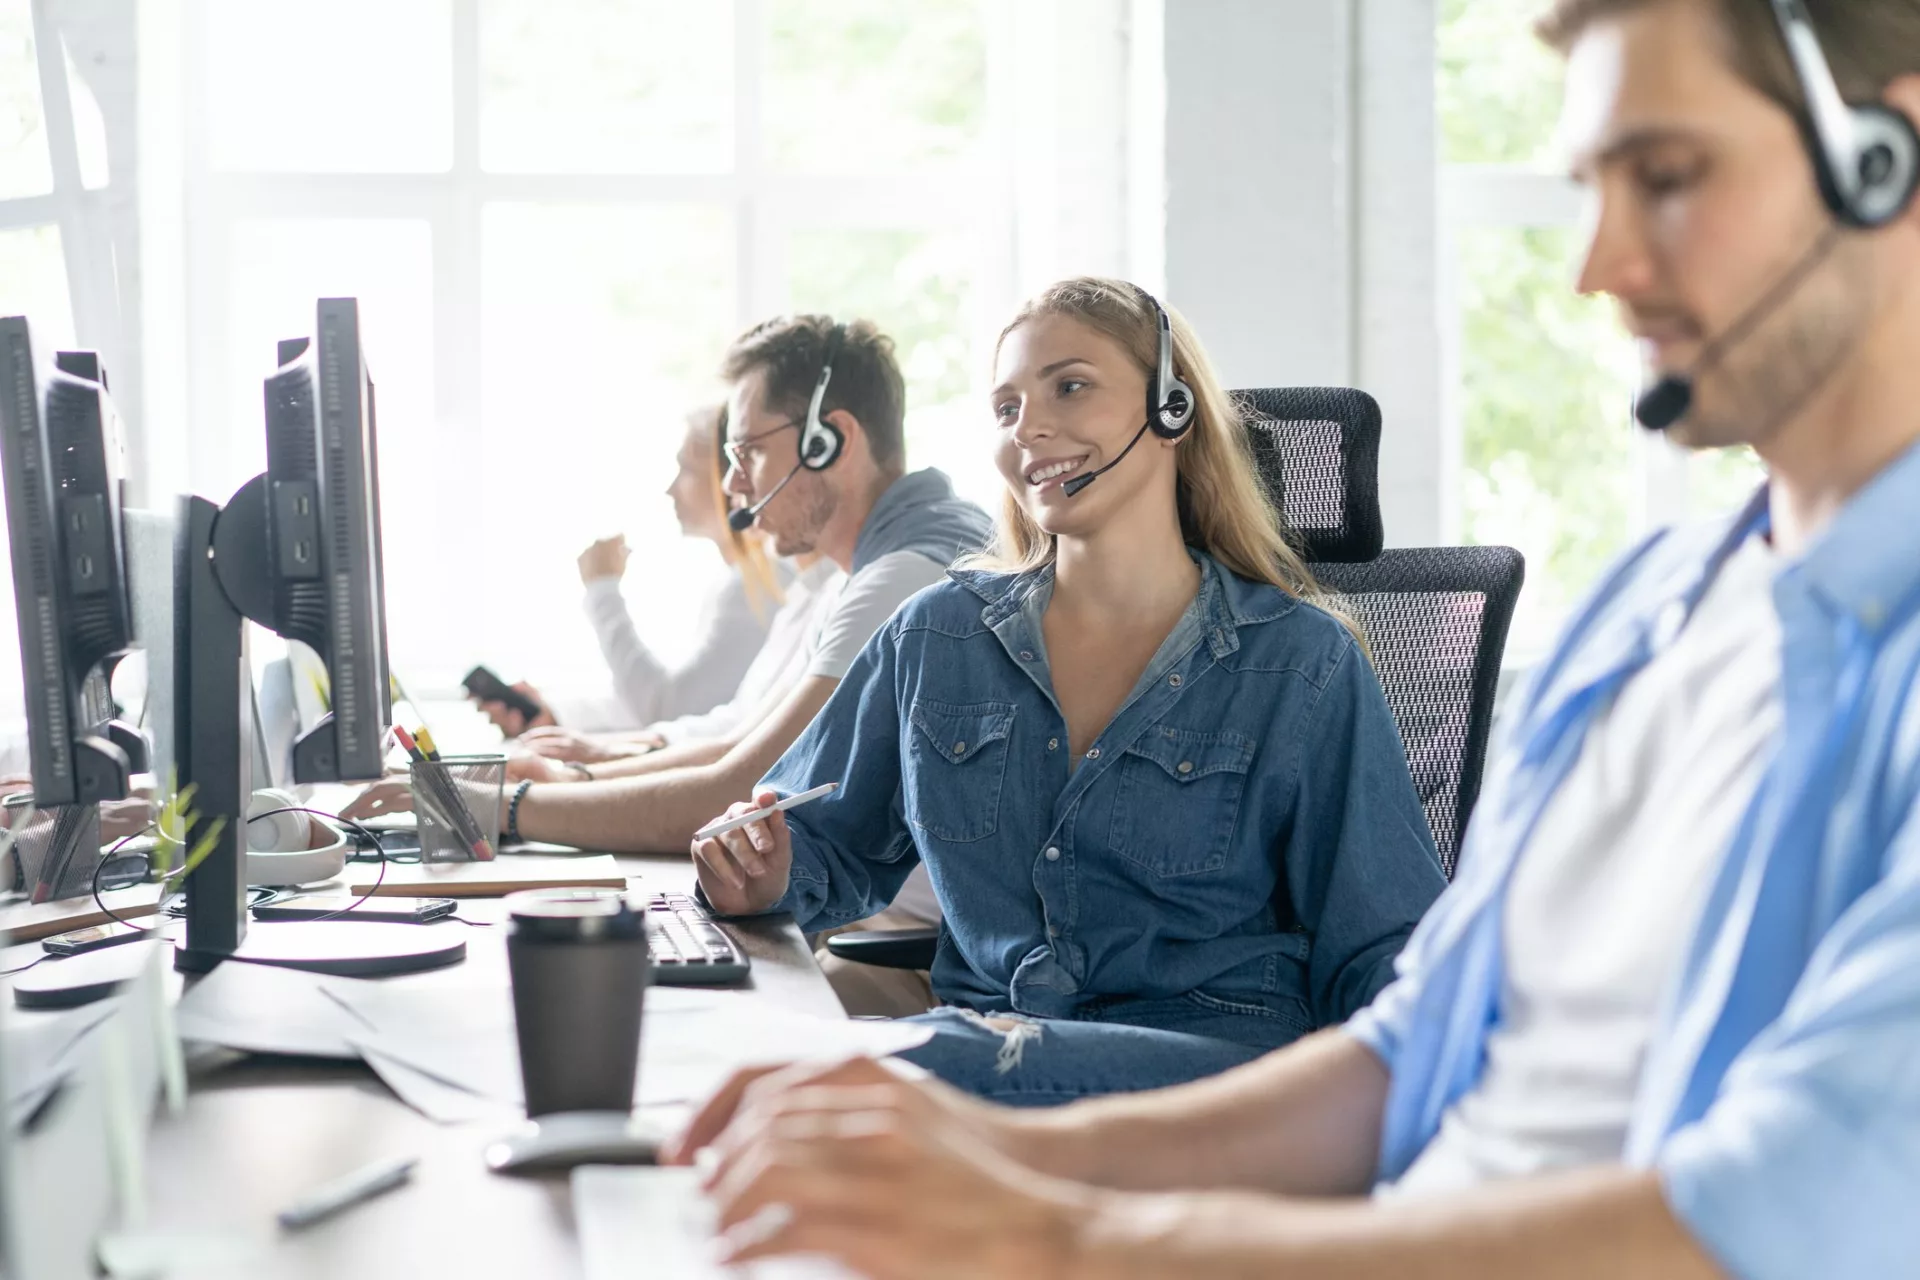 contact center agents in open office using the best knowledge management systems for customer service